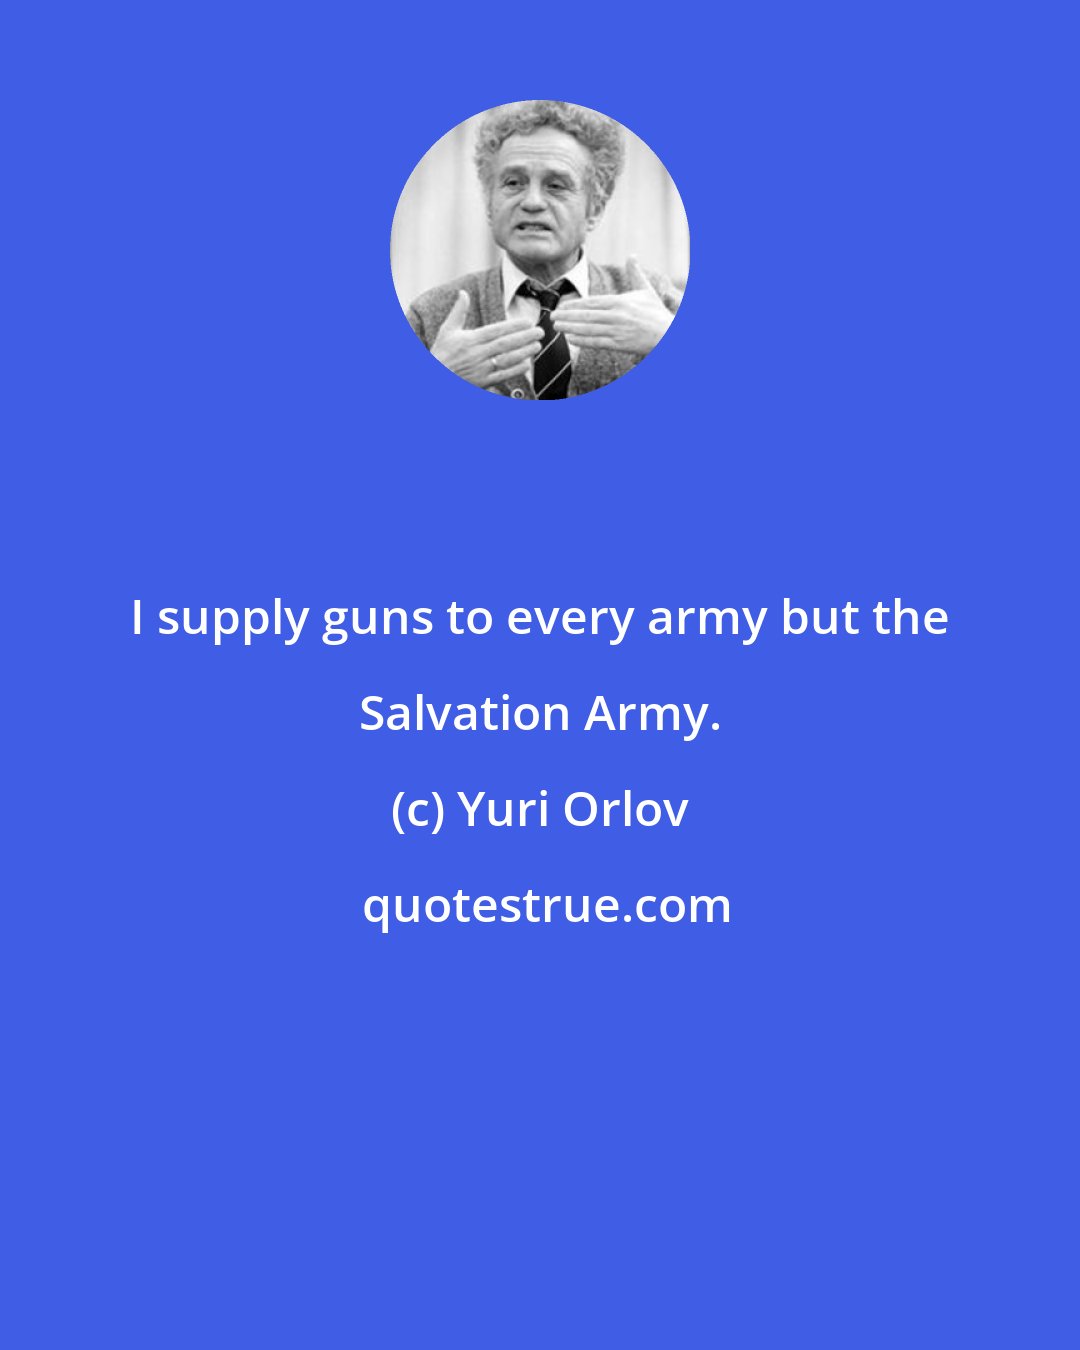 Yuri Orlov: I supply guns to every army but the Salvation Army.